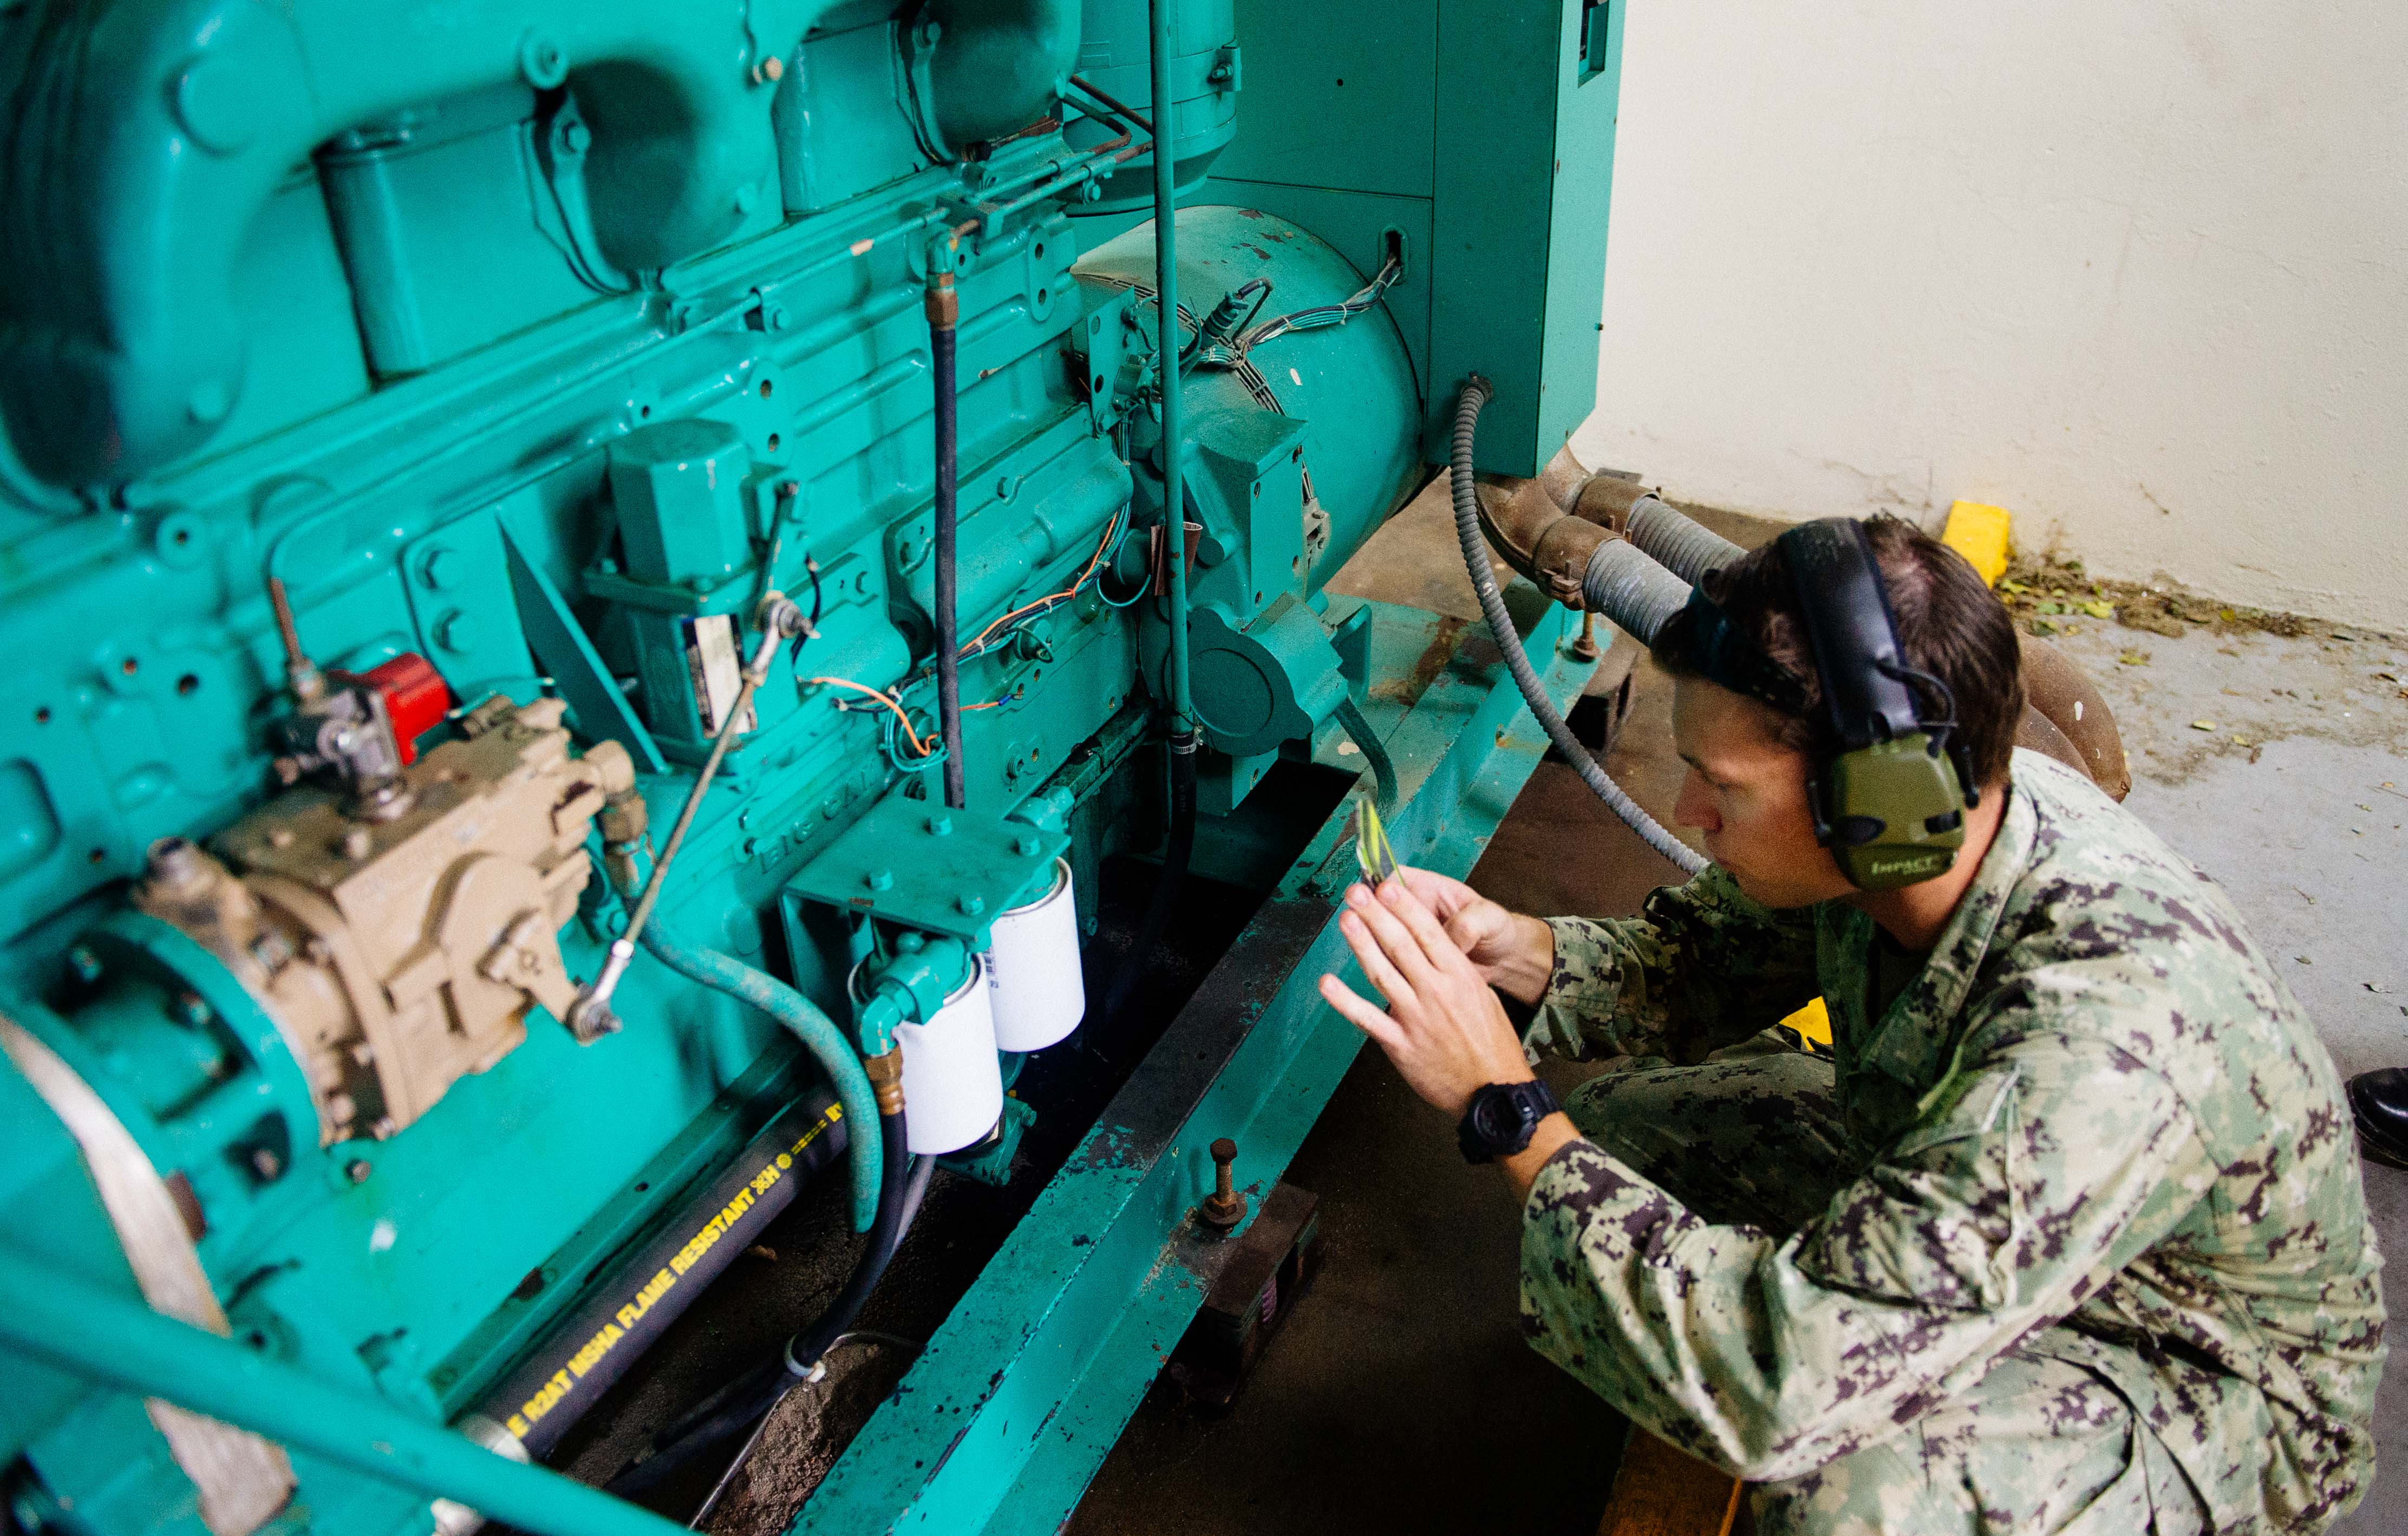 Construction Electrician 3rd Class Joshua Reding, assigned to Construction Battalion Maintenance Unit 202, inspects a generator at the Metropolitano De La Montana Hospital in Puerto Rico on Sept. 26 2017. US Navy